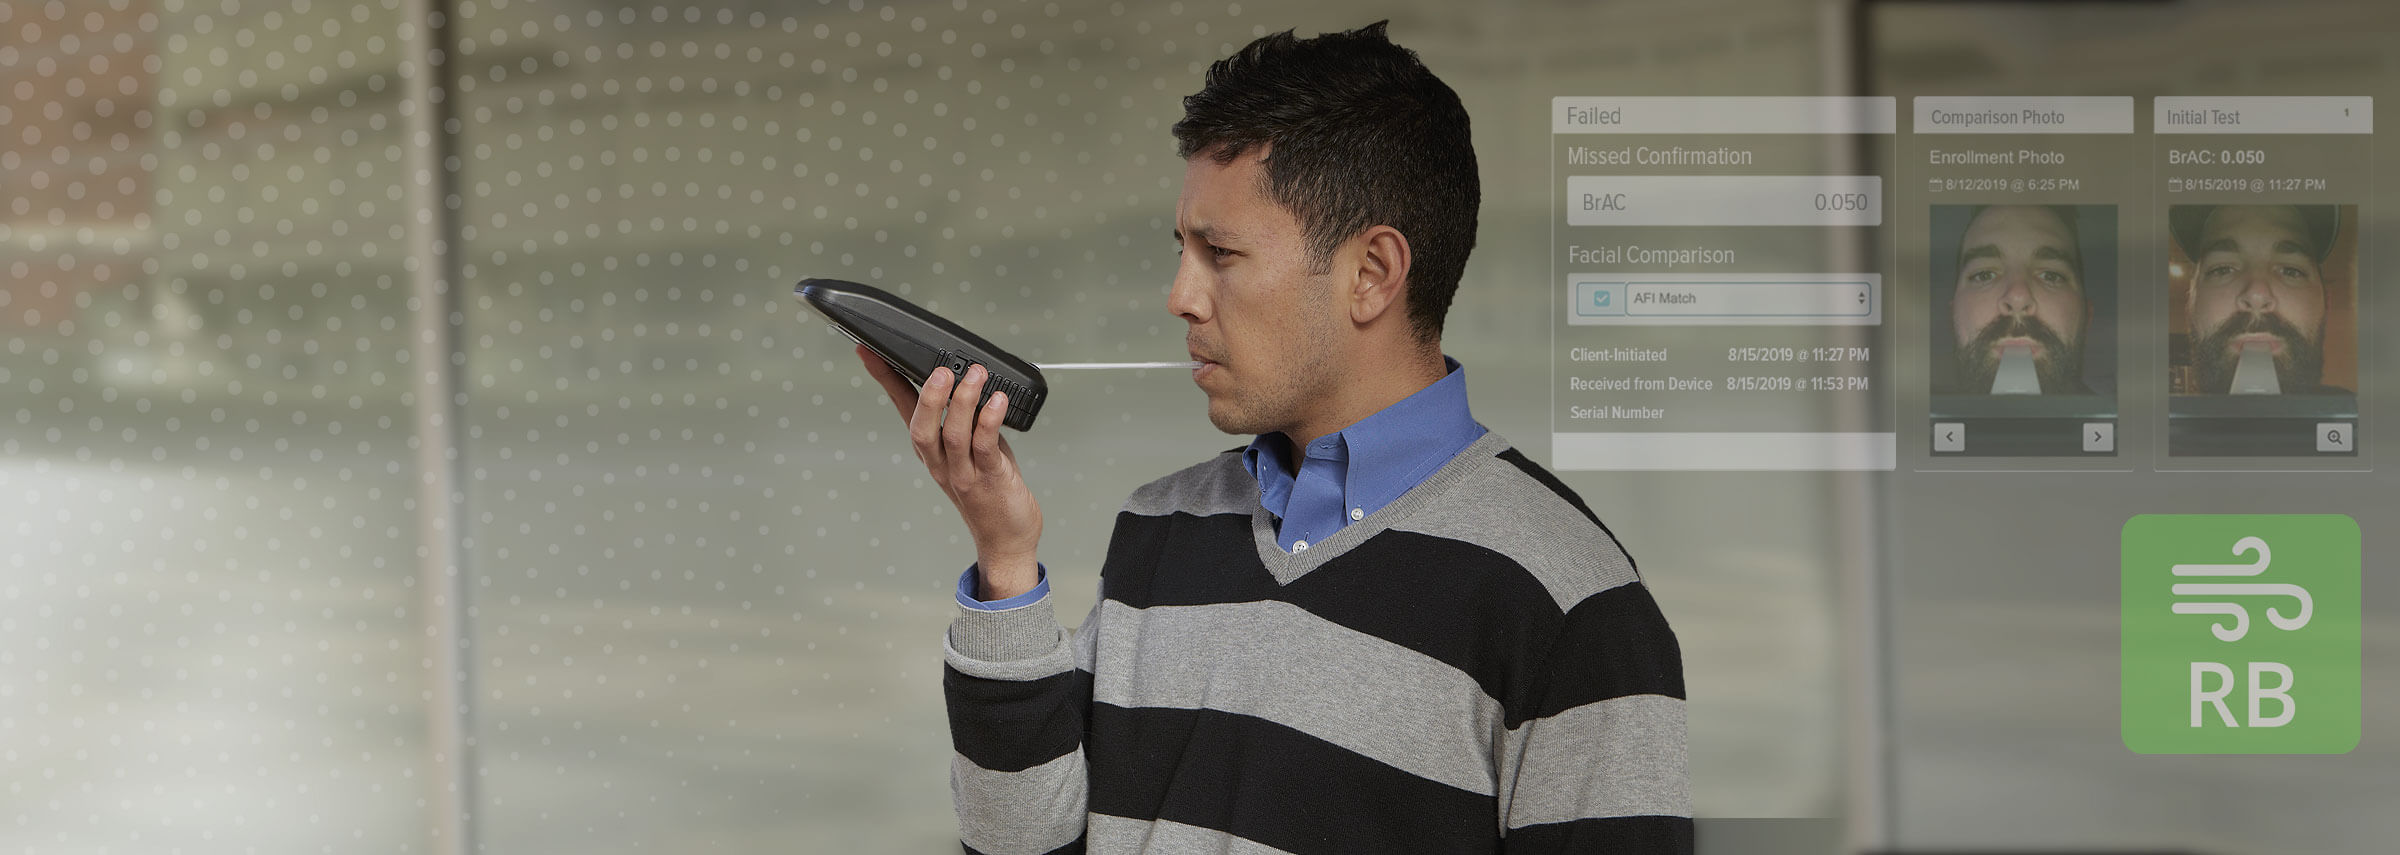 A young man using a portable breath alcohol testing device.